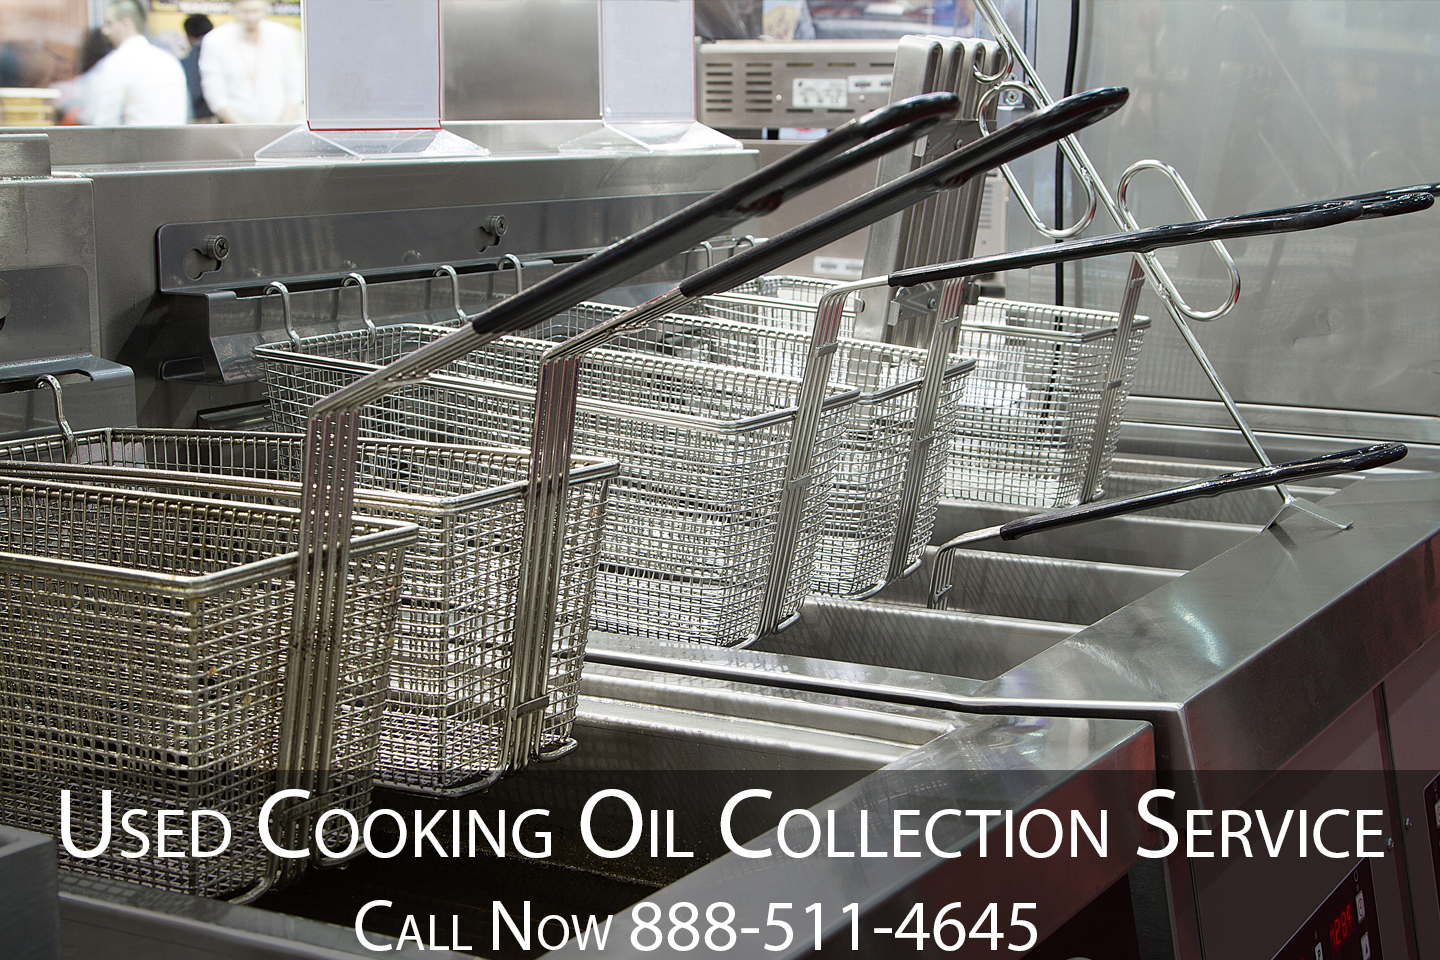 It is required by the city Fountain Valley, for all food servicing establishments to hire a licensed used cooking oil collection company to pick up and properly remove their waste cooking oil. As grease collection recycling companies, we must ensure that all waste is transported safely and disposed properly.  The majority of used cooking oil collected from commercial kitchens are filtered and processed turning it into renewable fuel called biodiesel. With a large increase in food servicing estabishments, a substantial amount of coming from restaurants are responsible for a major percentage of fueling transportation vehicles.